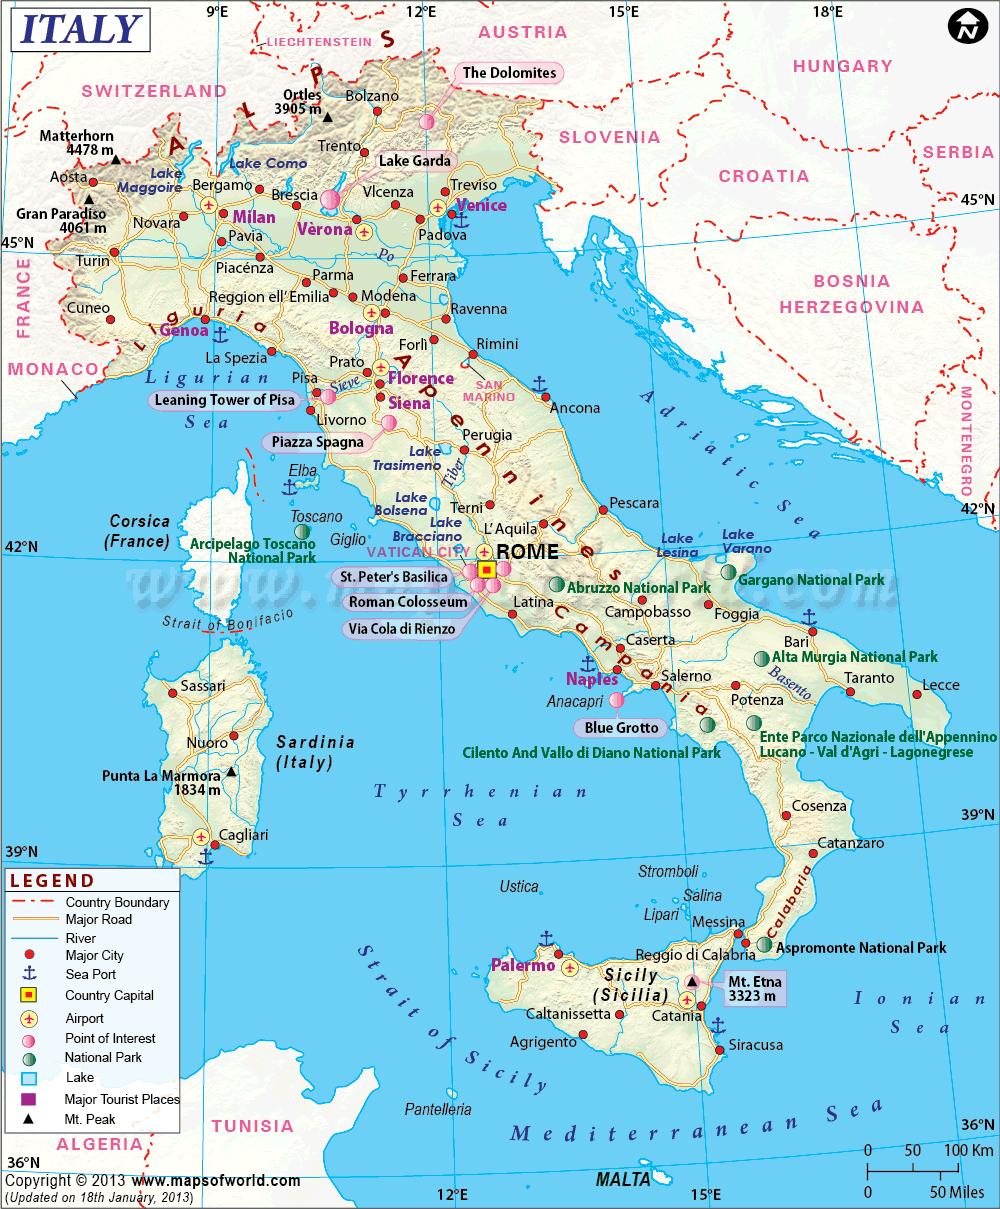 Market Brief on Italy Jan 2018 Location Facts and Figures Italy is a peninsula surrounded by Adriatic Sea in the east, Ionian Sea in the southeast, Tyrrhenian Sea in the southwest and its southern